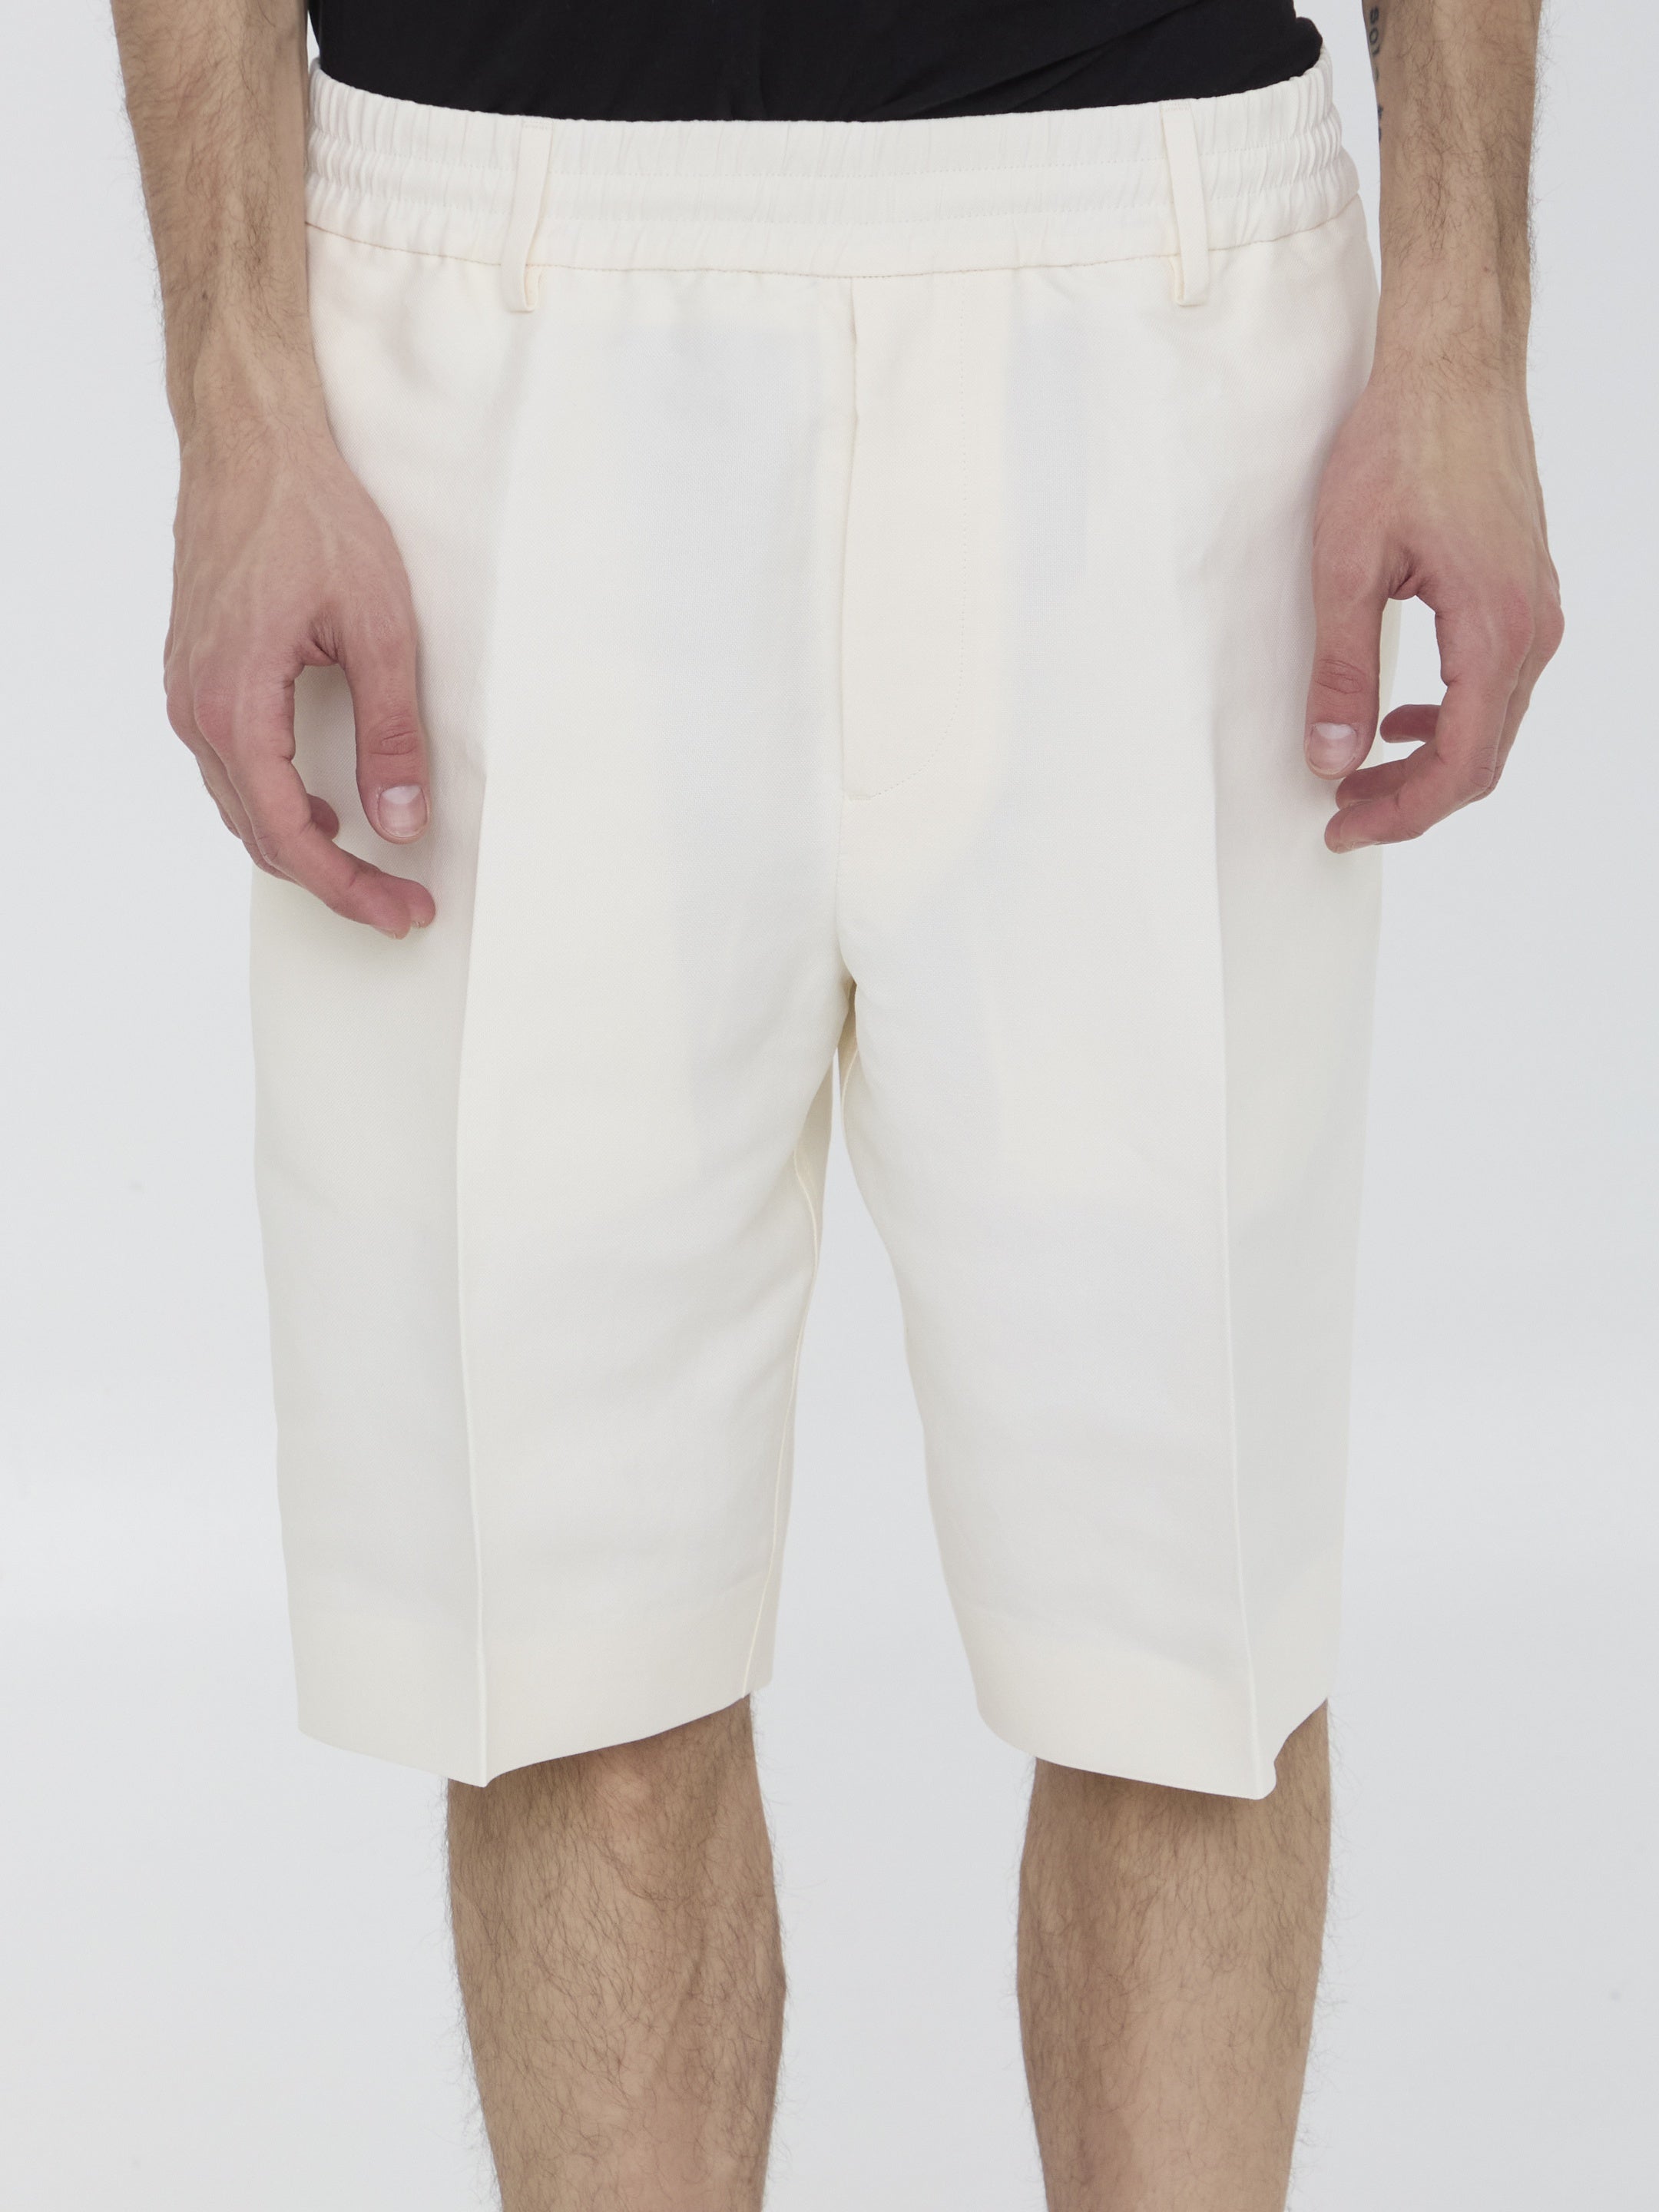 BURBERRY-OUTLET-SALE-Tailored-bermuda-shorts-Hosen-48-WHITE-ARCHIVE-COLLECTION.jpg